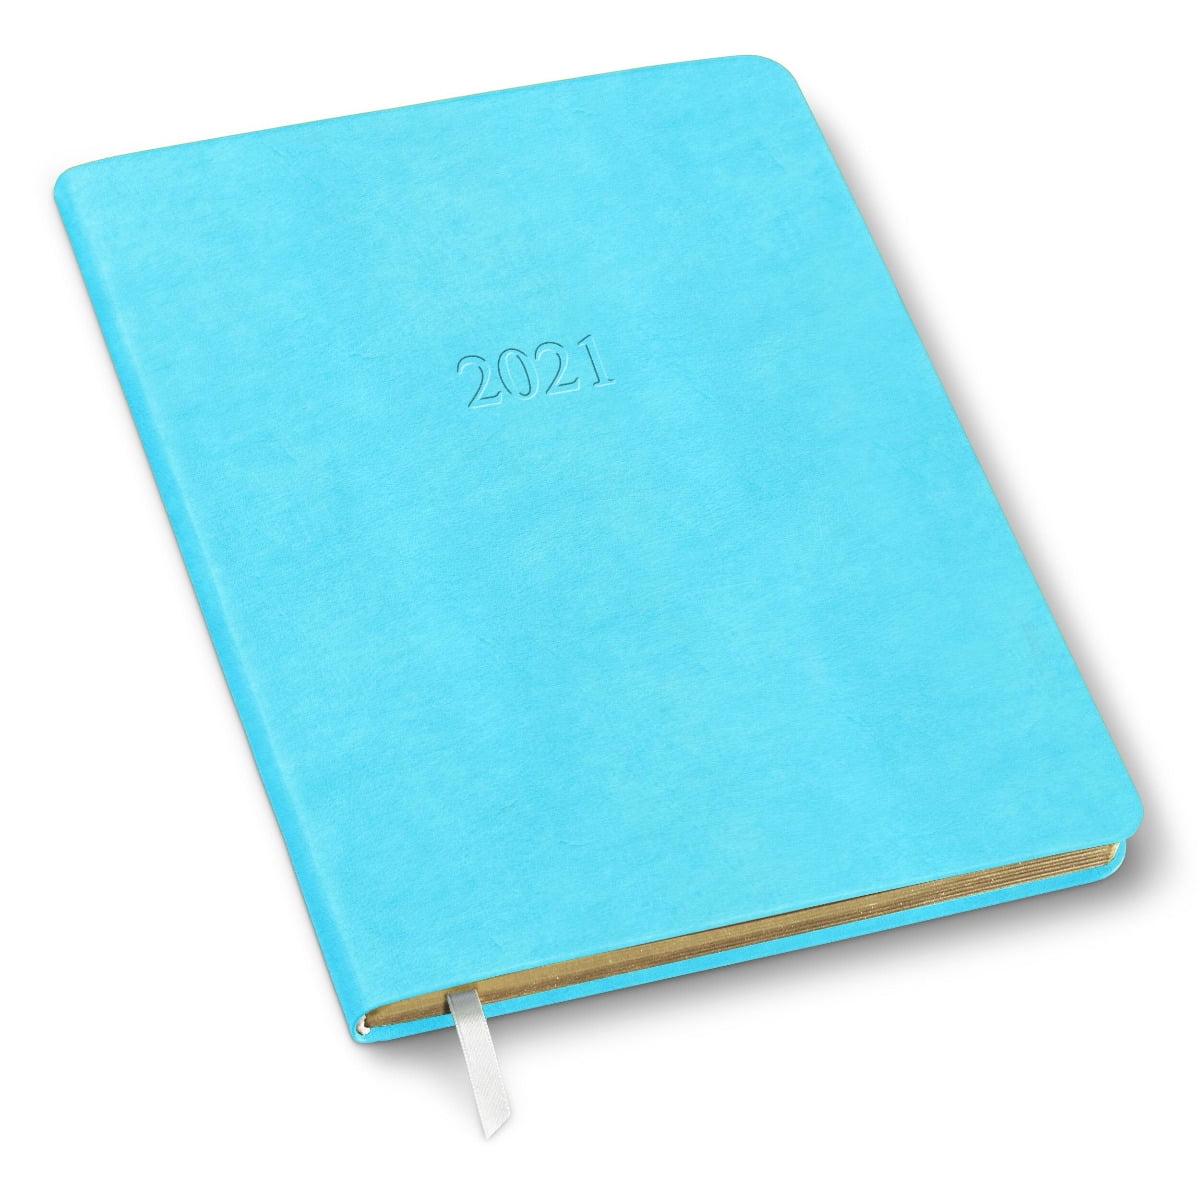 Leather 2021 Large Monthly Planner by Gallery Leather, 9.75" x 7.5", 96